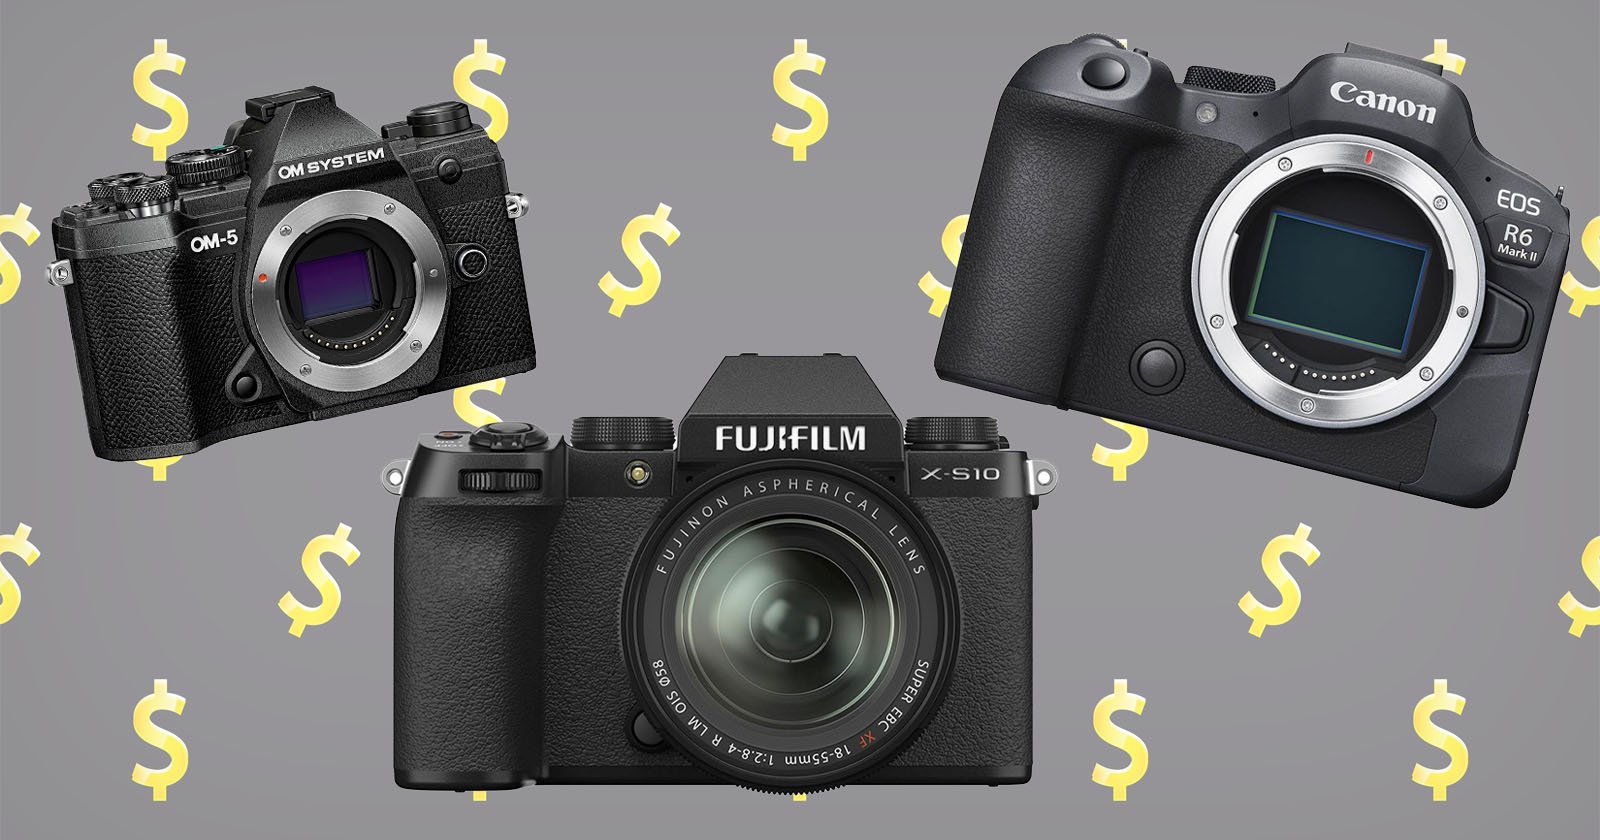 You Can Get Some Really Good Deals on Camera Equipment Right Now